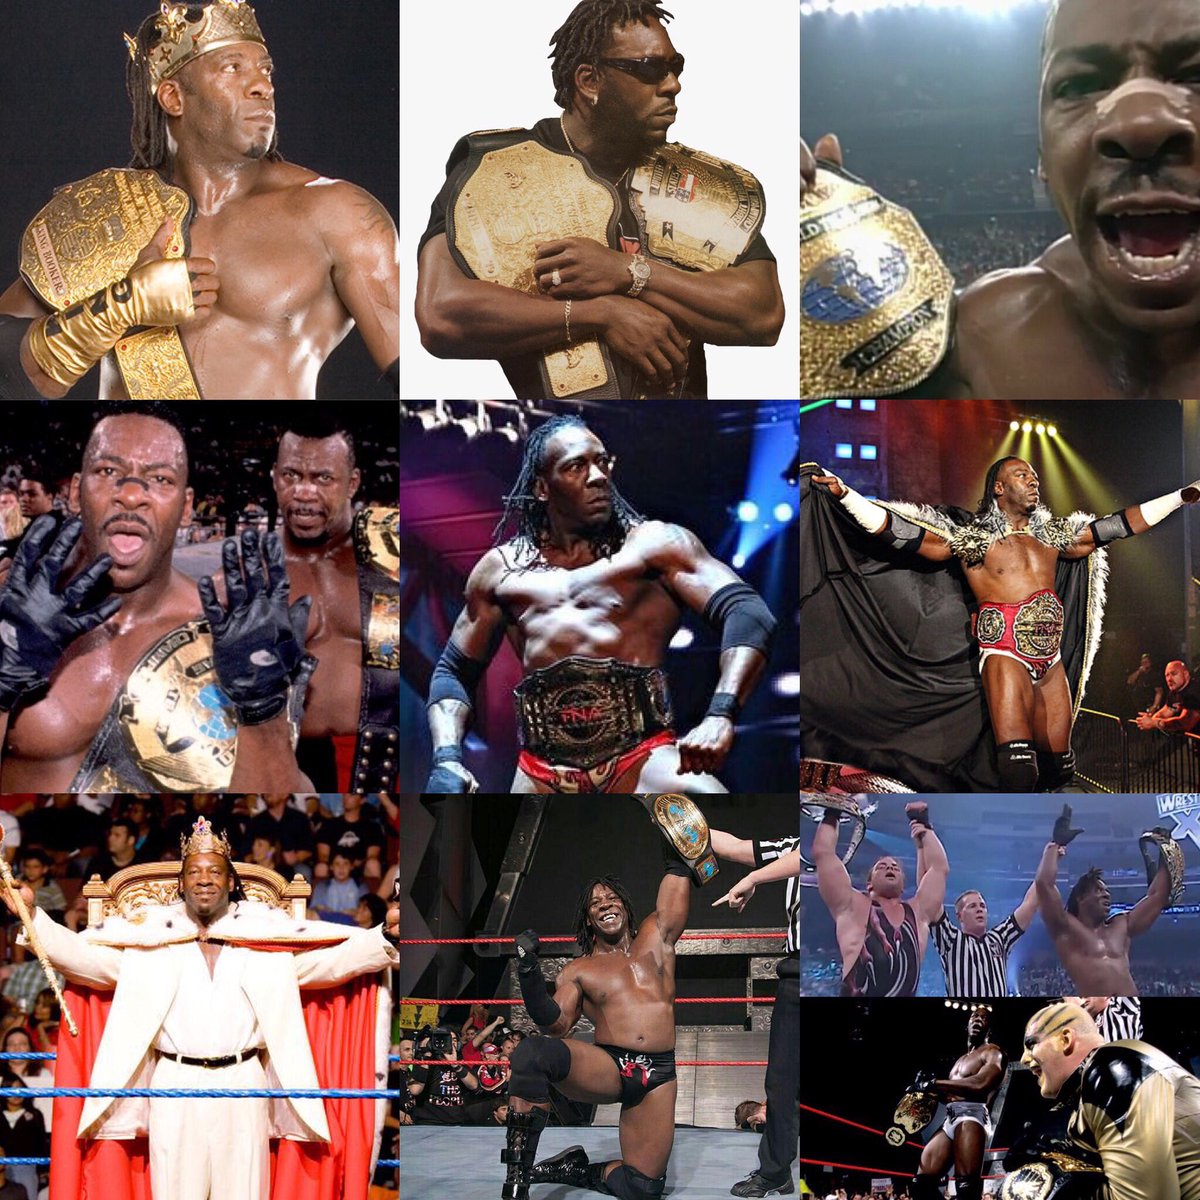 Happy birthday to Booker T 😍🥳 #BookerT #KingBooker #WWERaw #SmackDown #WCW #impactwrestling #HappyBirthdayBookerT #HappyBirthday #birthday #birthdayboy #CanYouDigItSucka #Spinaroonie #Legend